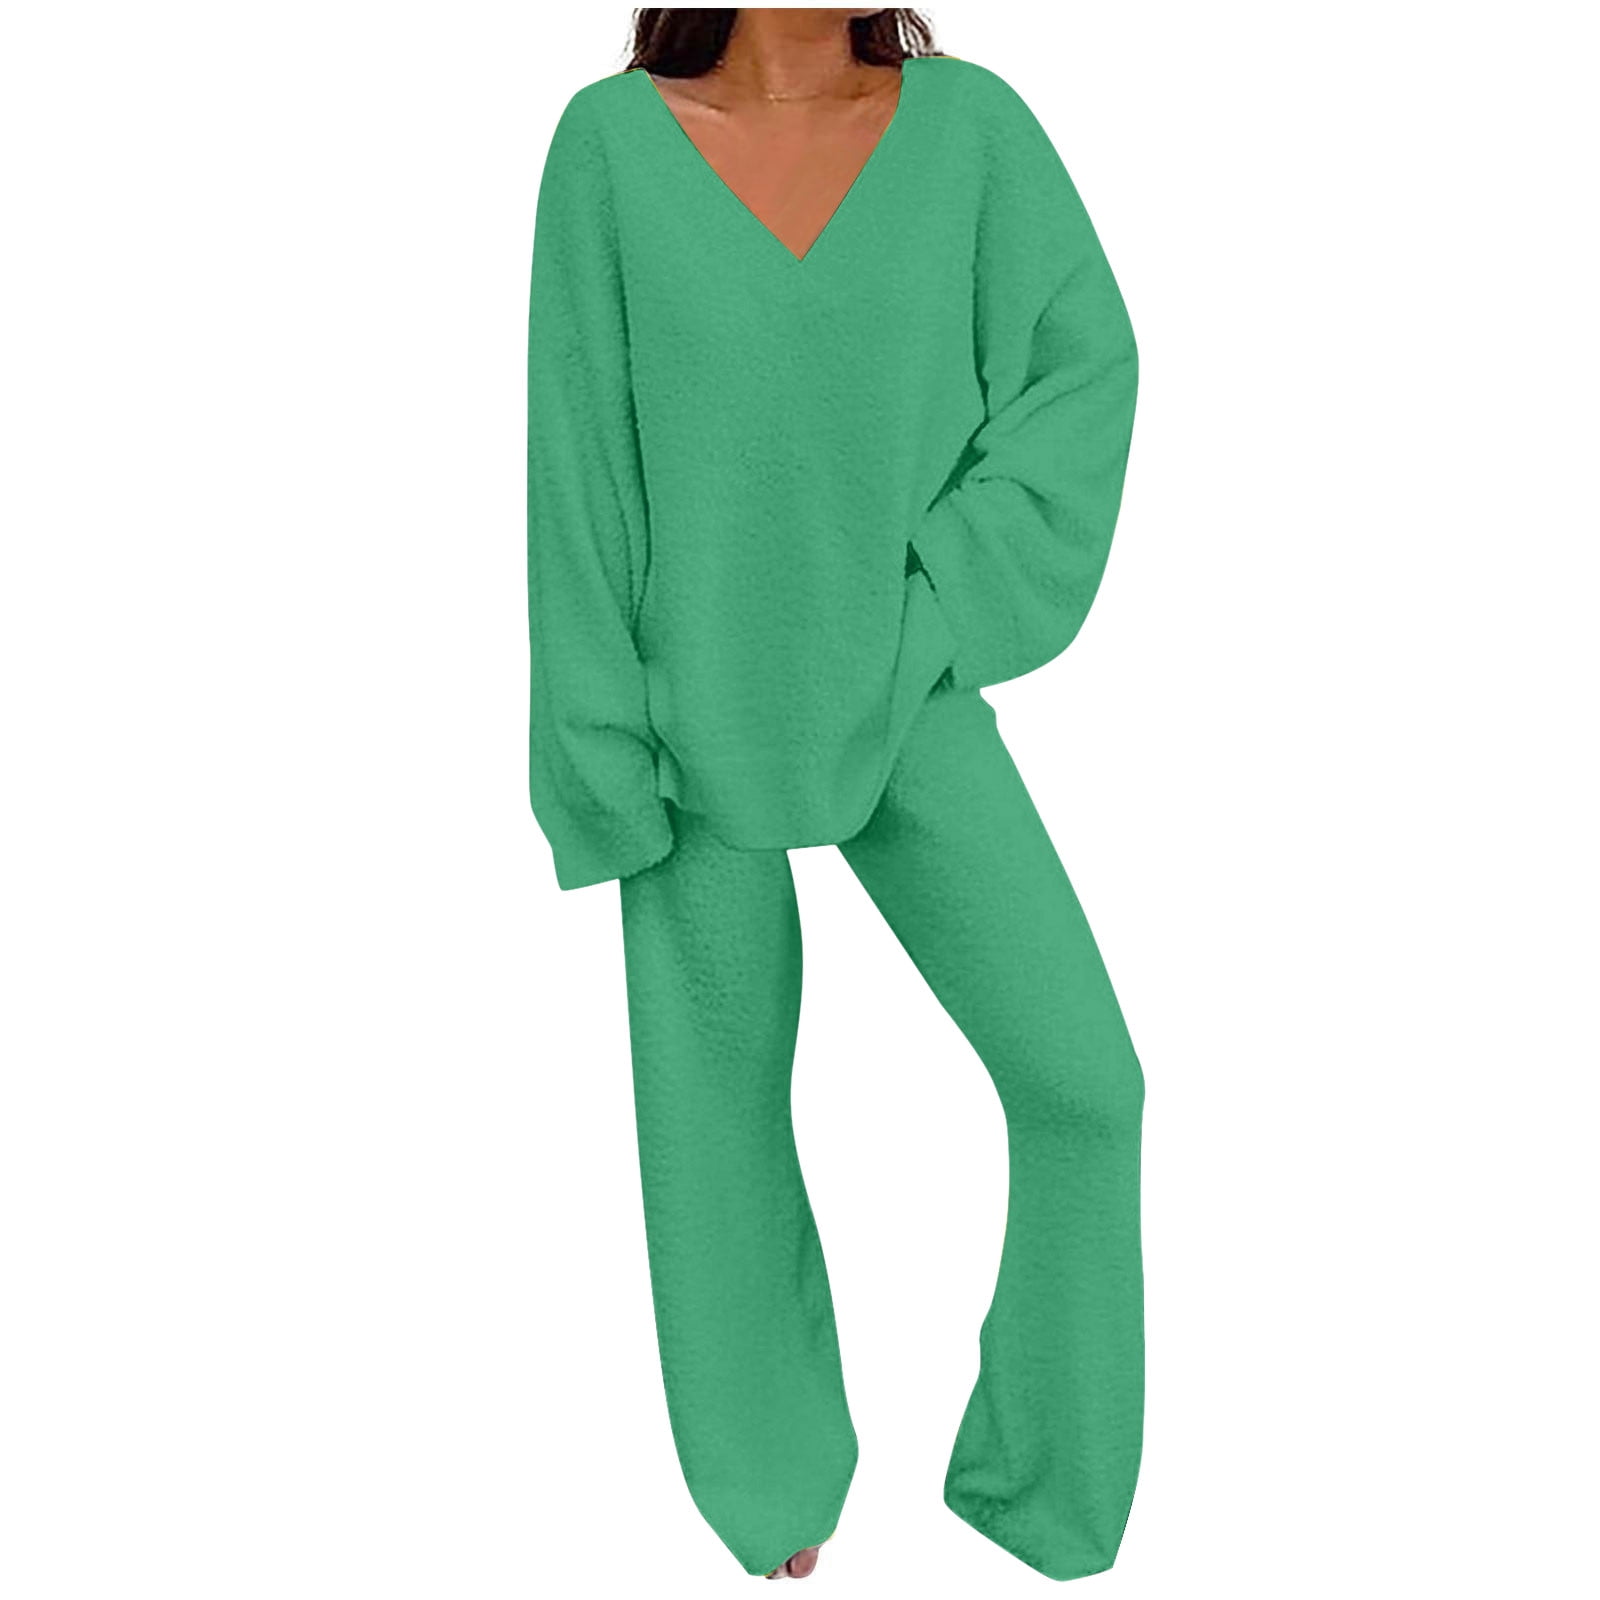 Women's Pajamas Sets Warm Winter Plush Cozy V Neck Long Sleeve Tops and  Pants 2 Piece Outfits Fuzzy Sleepwear 